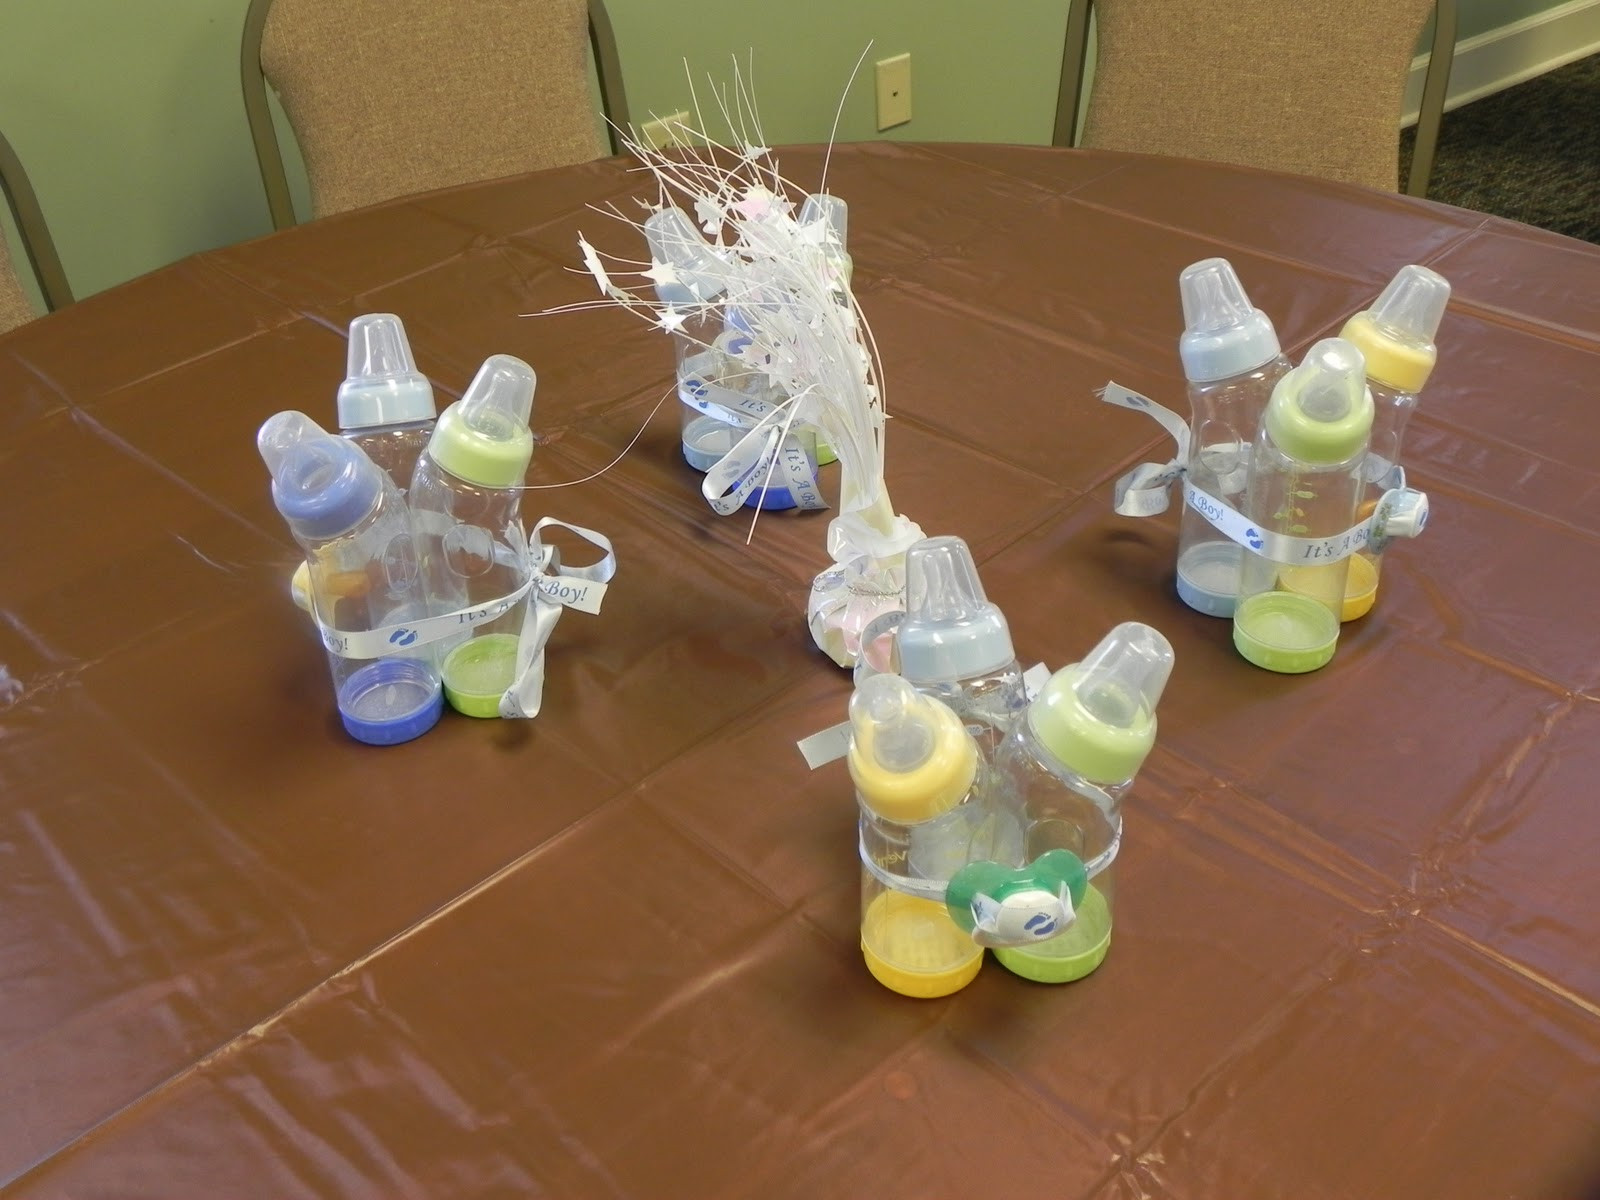 Baby Shower Decor Ideas For Tables
 LIFES LITTLE GARDEN Decorations For The Baby Shower